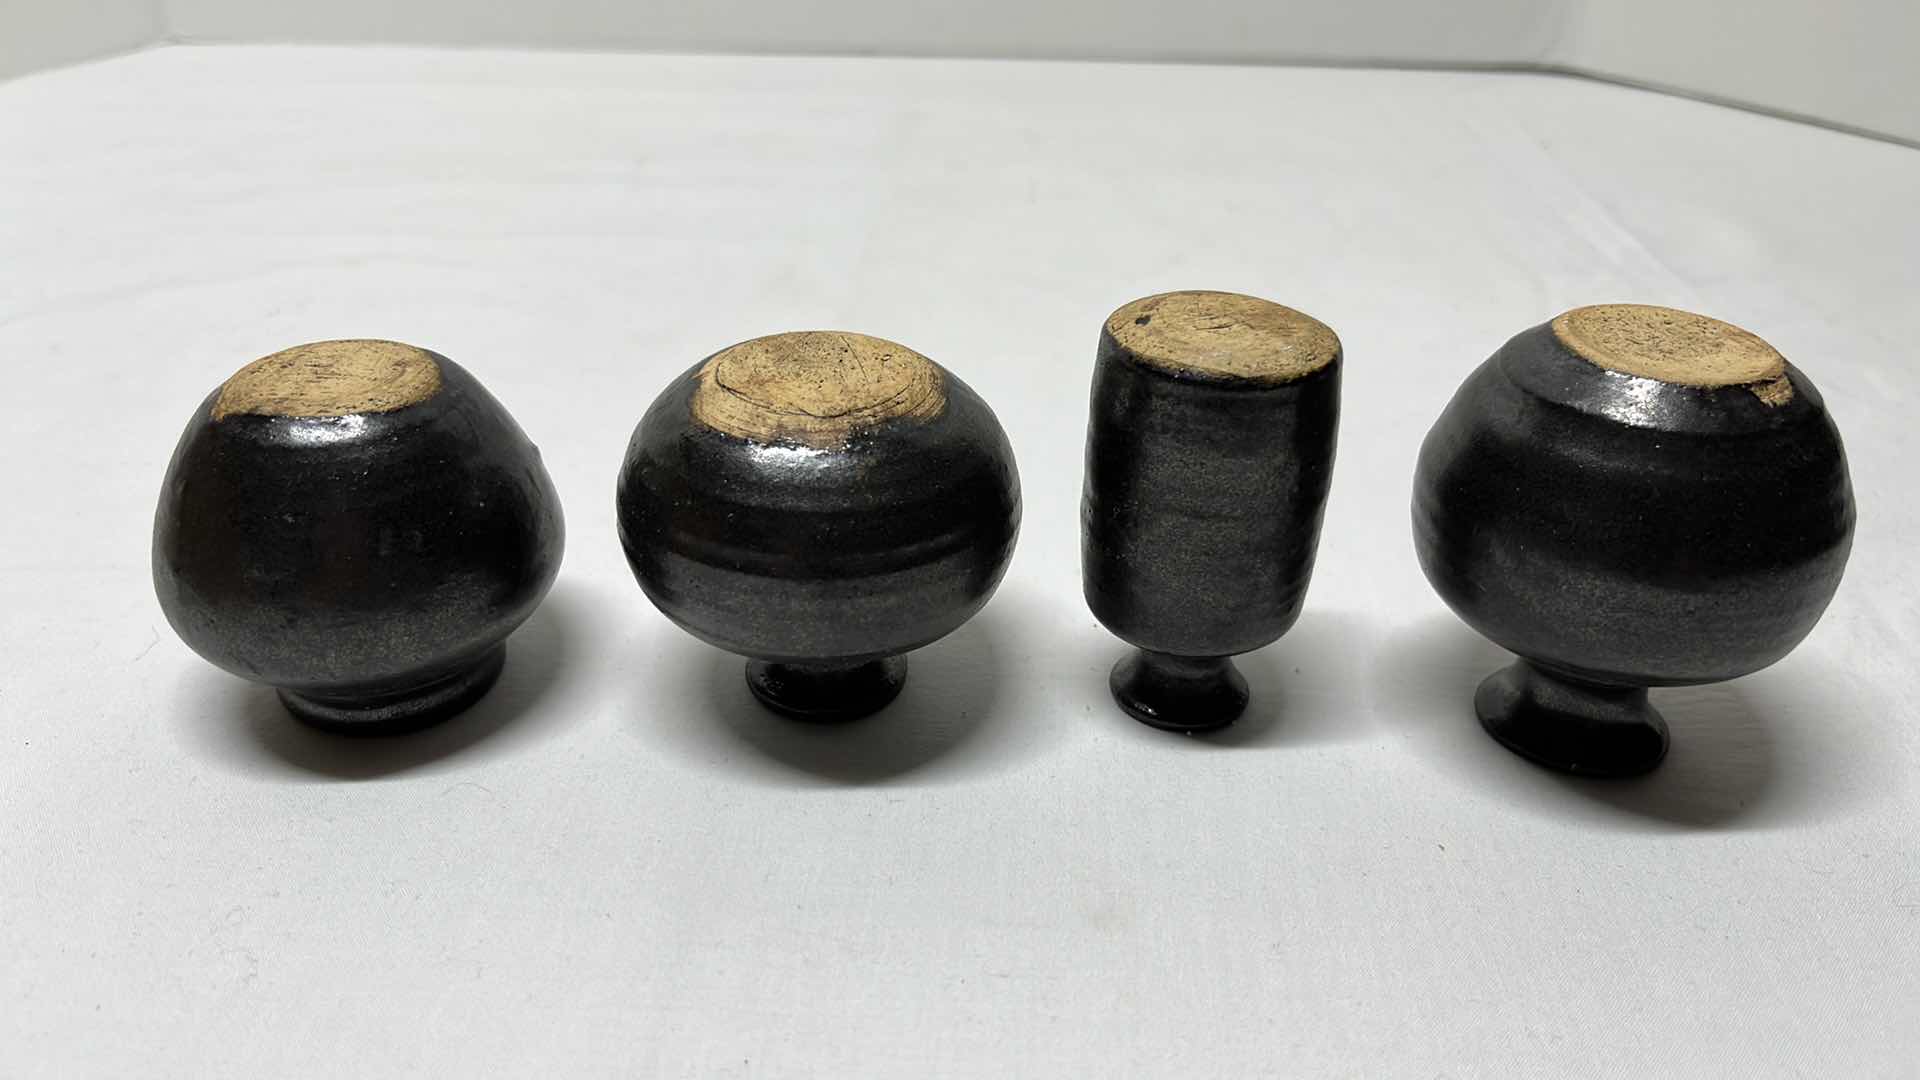 Photo 5 of CLAY 3”H GLASSES & CLAY POTTERY VASES 2.75”H (8 PCS)